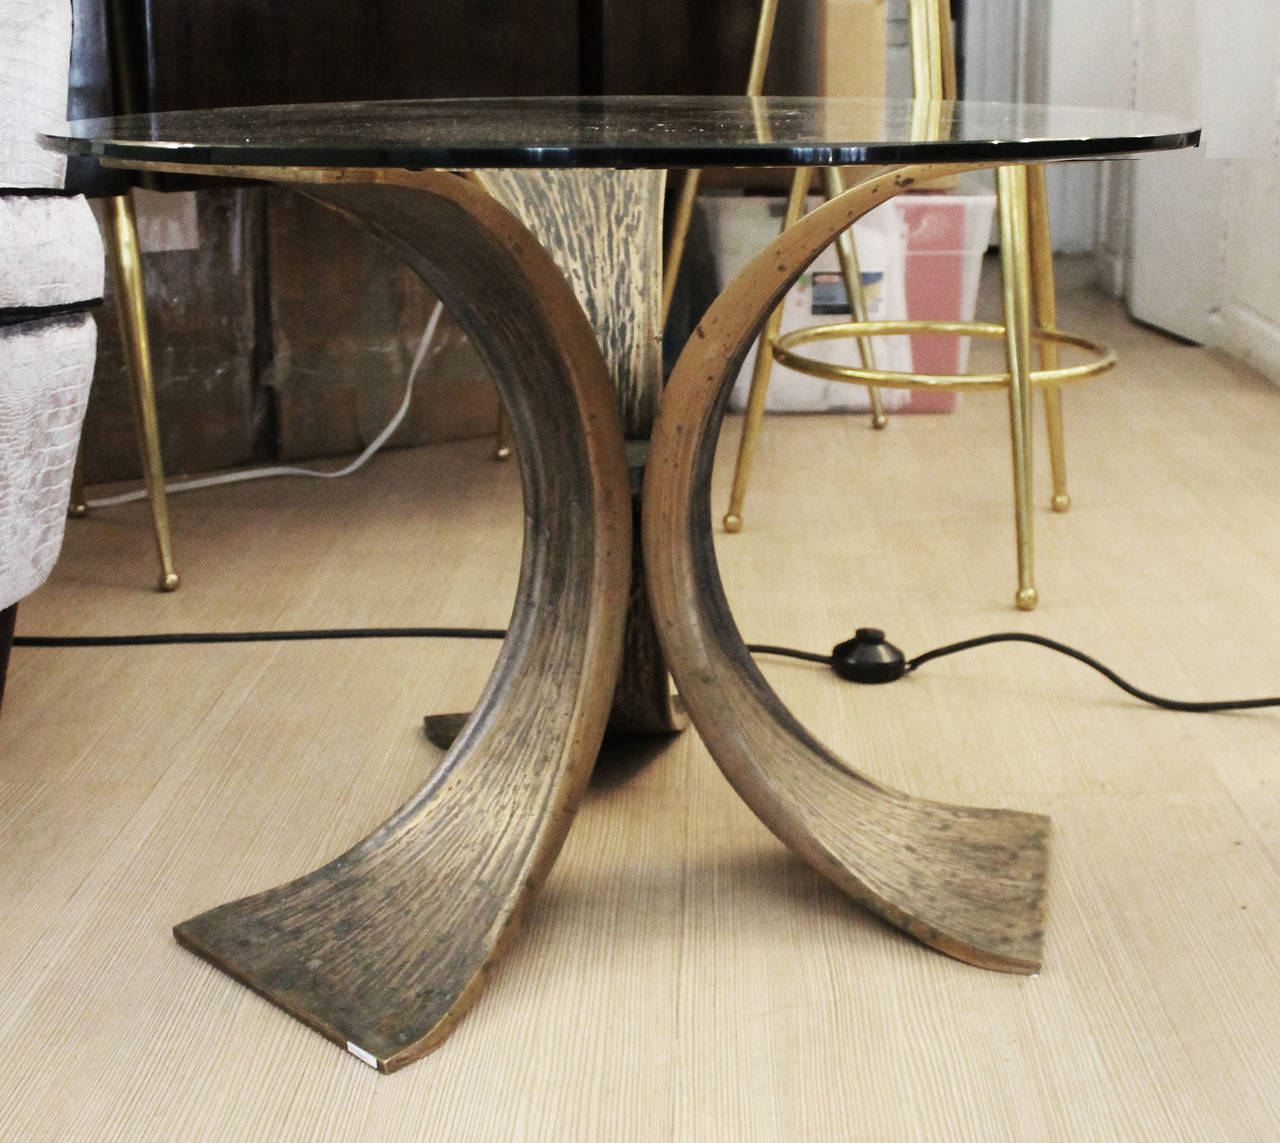 The table is made with three cast bronze arc shaped and ribbed legs joined in the middle. This a Classic design by Luciano Frigerio. Son of a high end furniture maker active since 1889, Luciano Frigerio (1928-1999) goal was to create sculpture